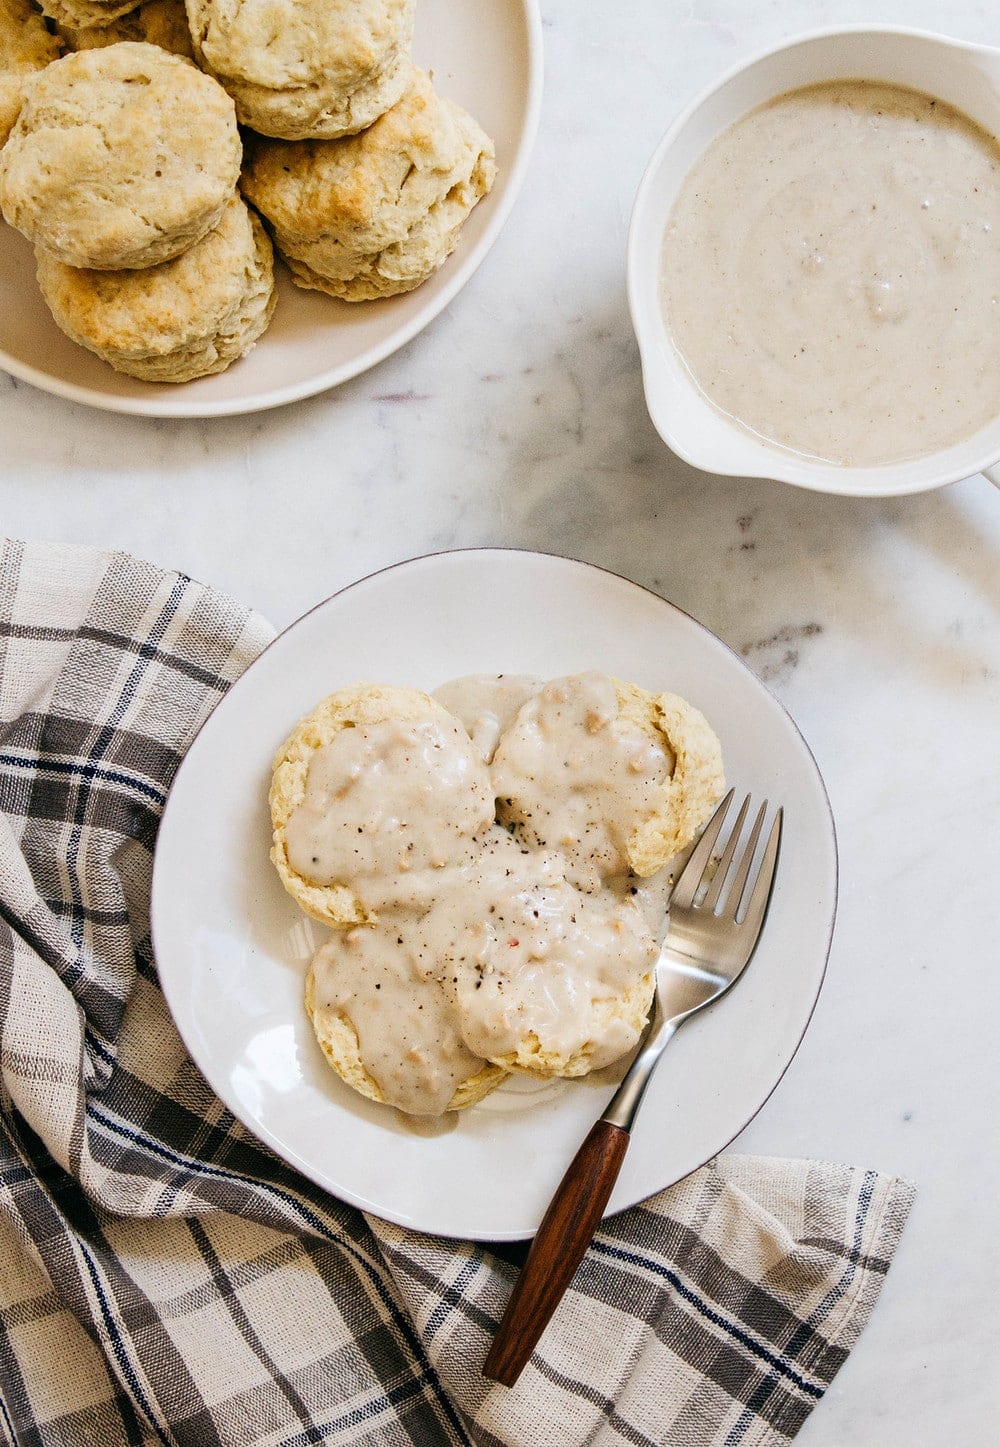 top down view of a plate of biscuits and gravy with fork, surrounded by a plate of stacked biscuits and gravy bowl.